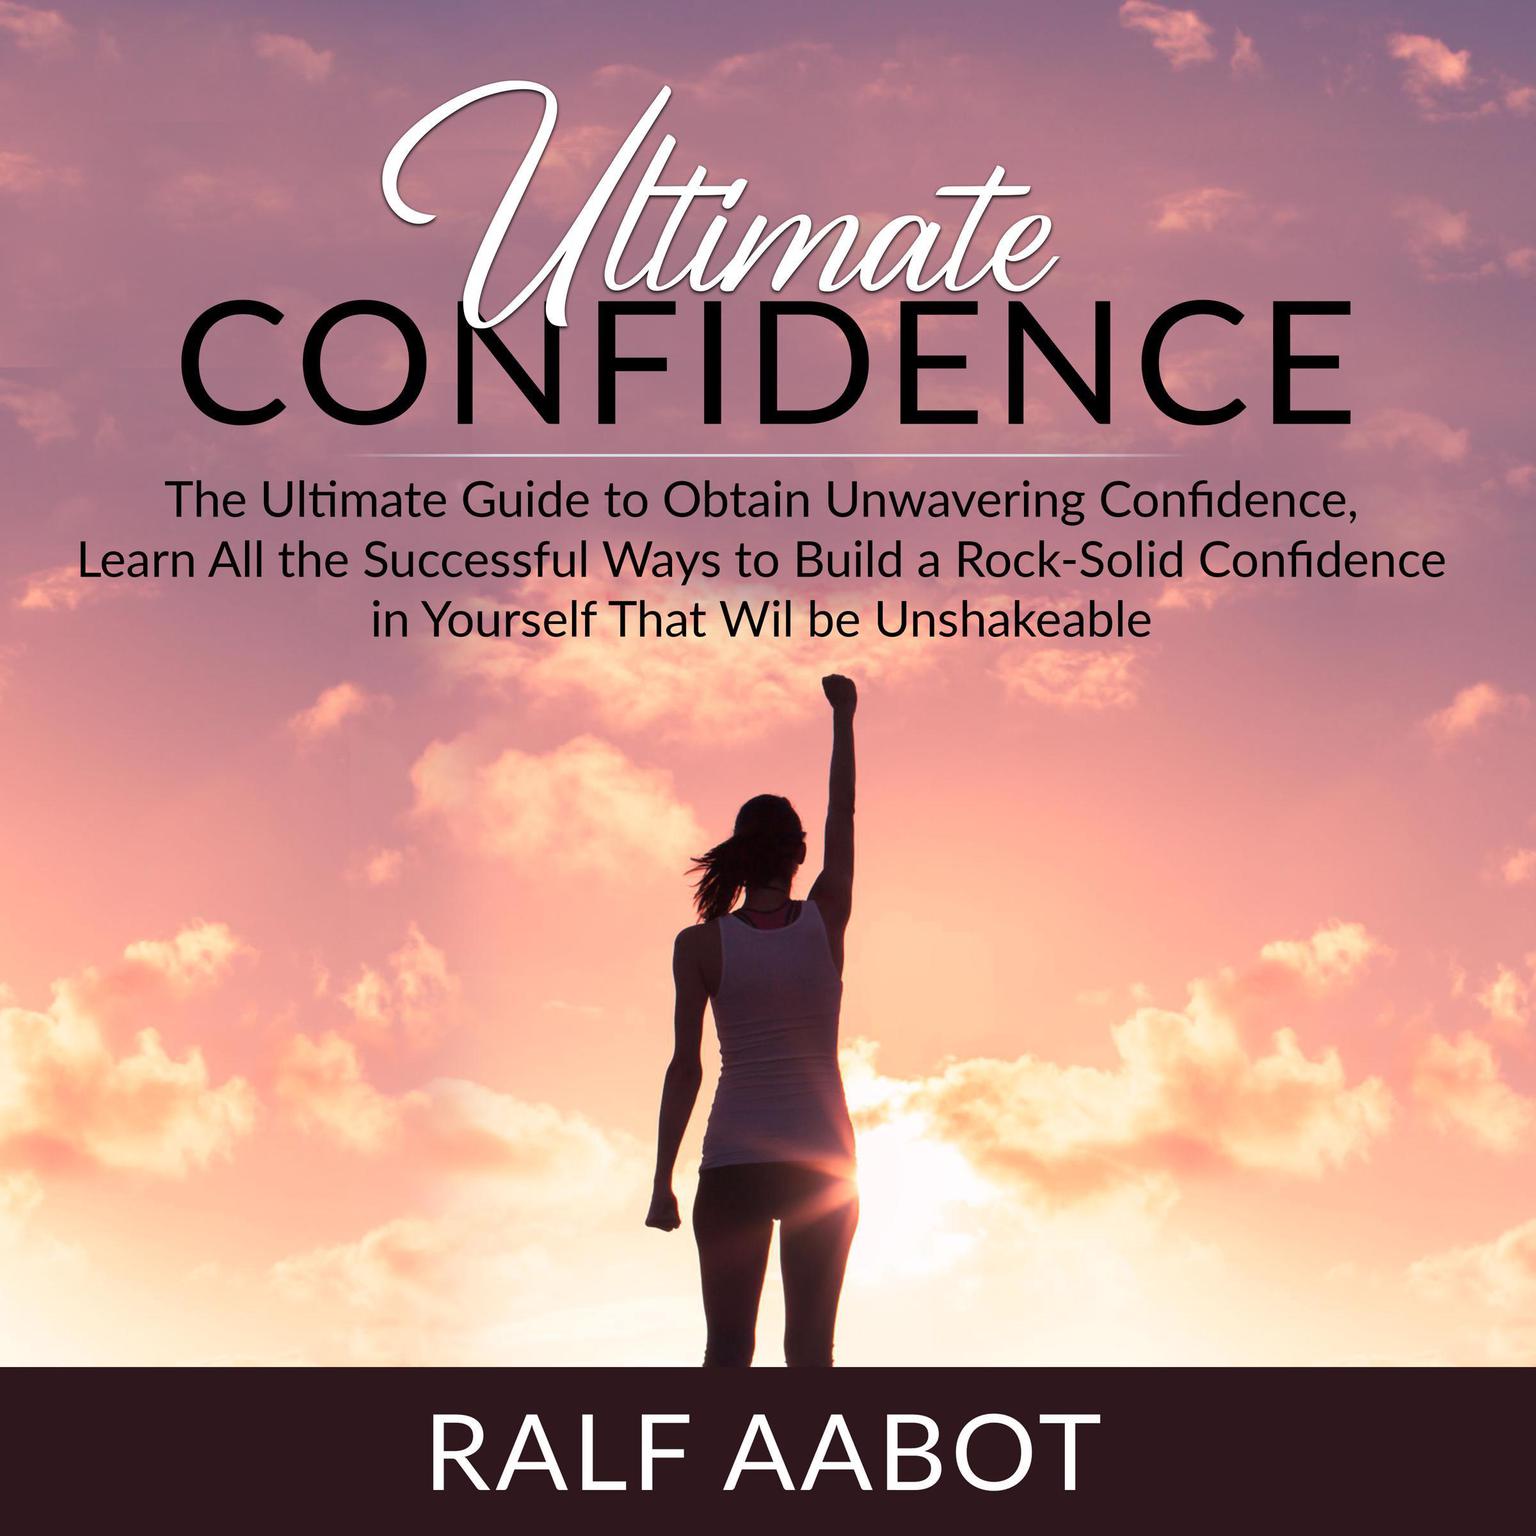 Ultimate Confidence: The Ultimate Guide to Obtain Unwavering Confidence, Learn All the Successful Ways to Build a Rock-Solid Confidence in Yourself That Will be Unshakeable Audiobook, by Ralf Aabot